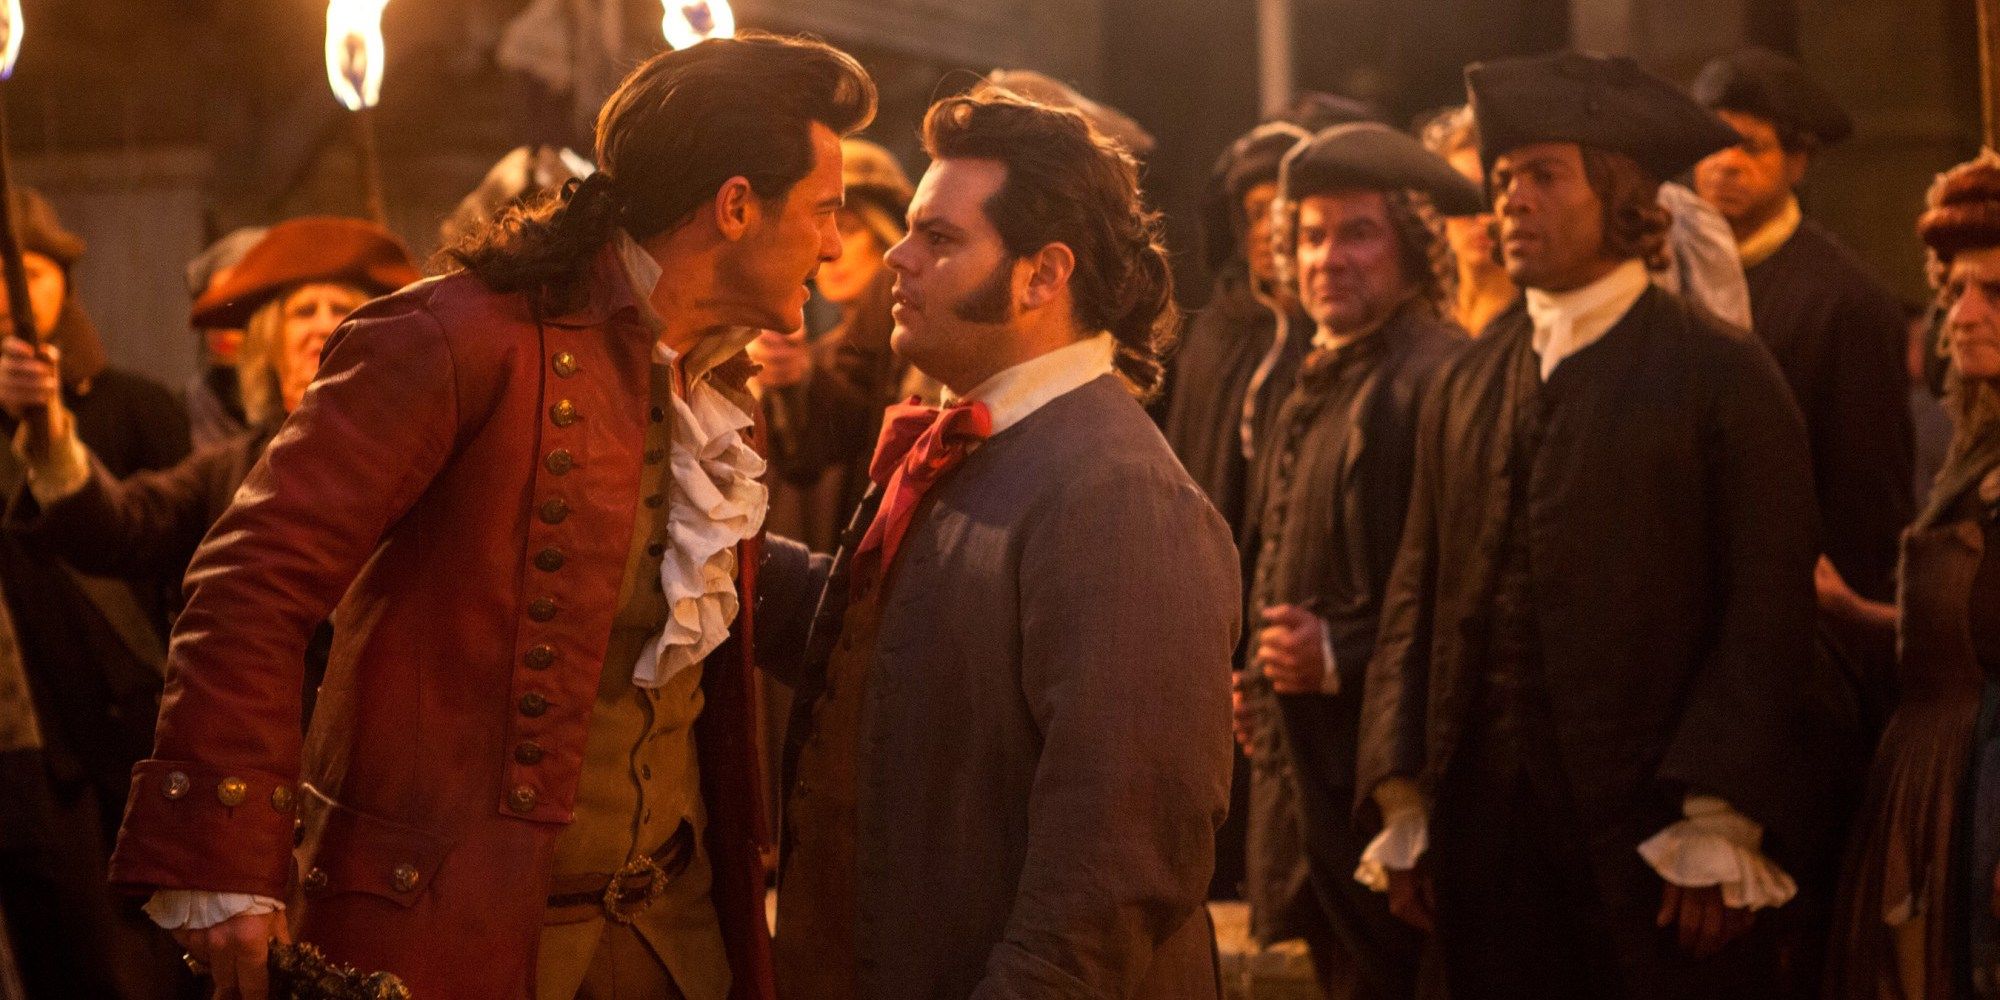 Beauty & the Beast Gaston Prequel TV Show is Happening At Disney+